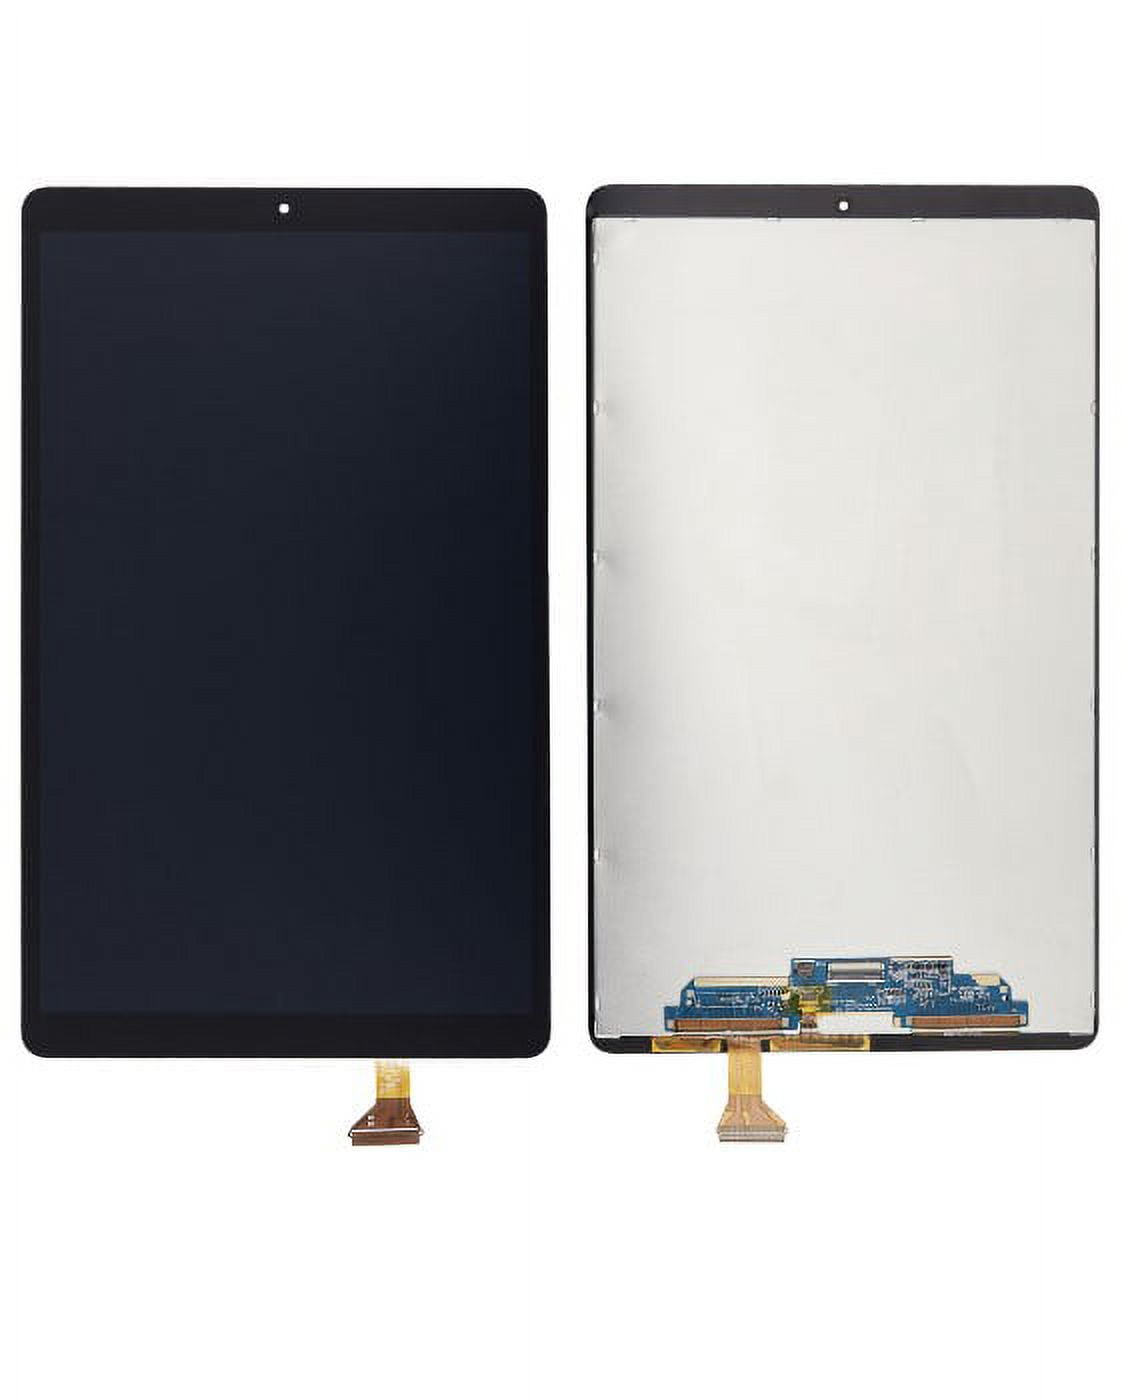 LCD Display Touch Screen Digitizer Assembly For Samsung Galaxy Tab A 10.1  (2019) SM-T510 / SM-T515 - Black (Refurbished)